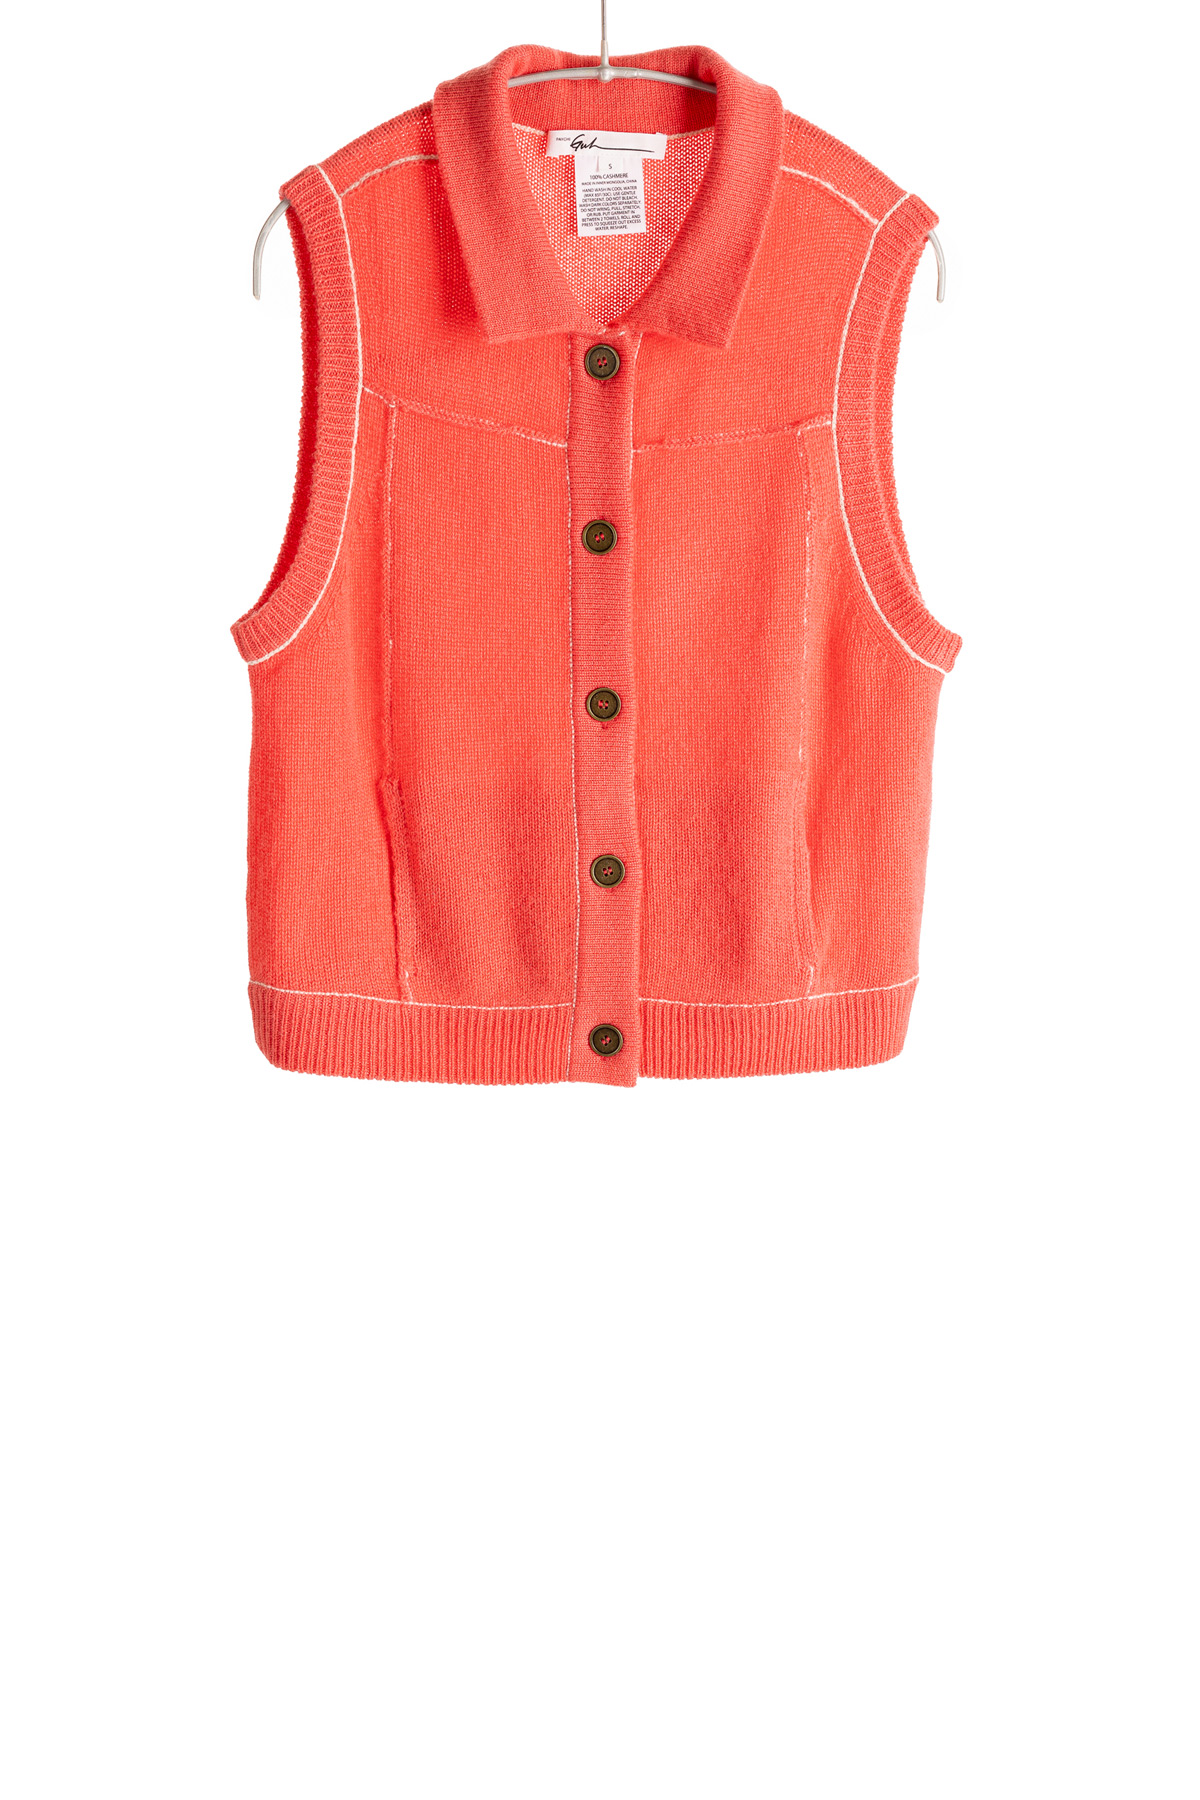 S400_JeanVest_Coral_H1Front